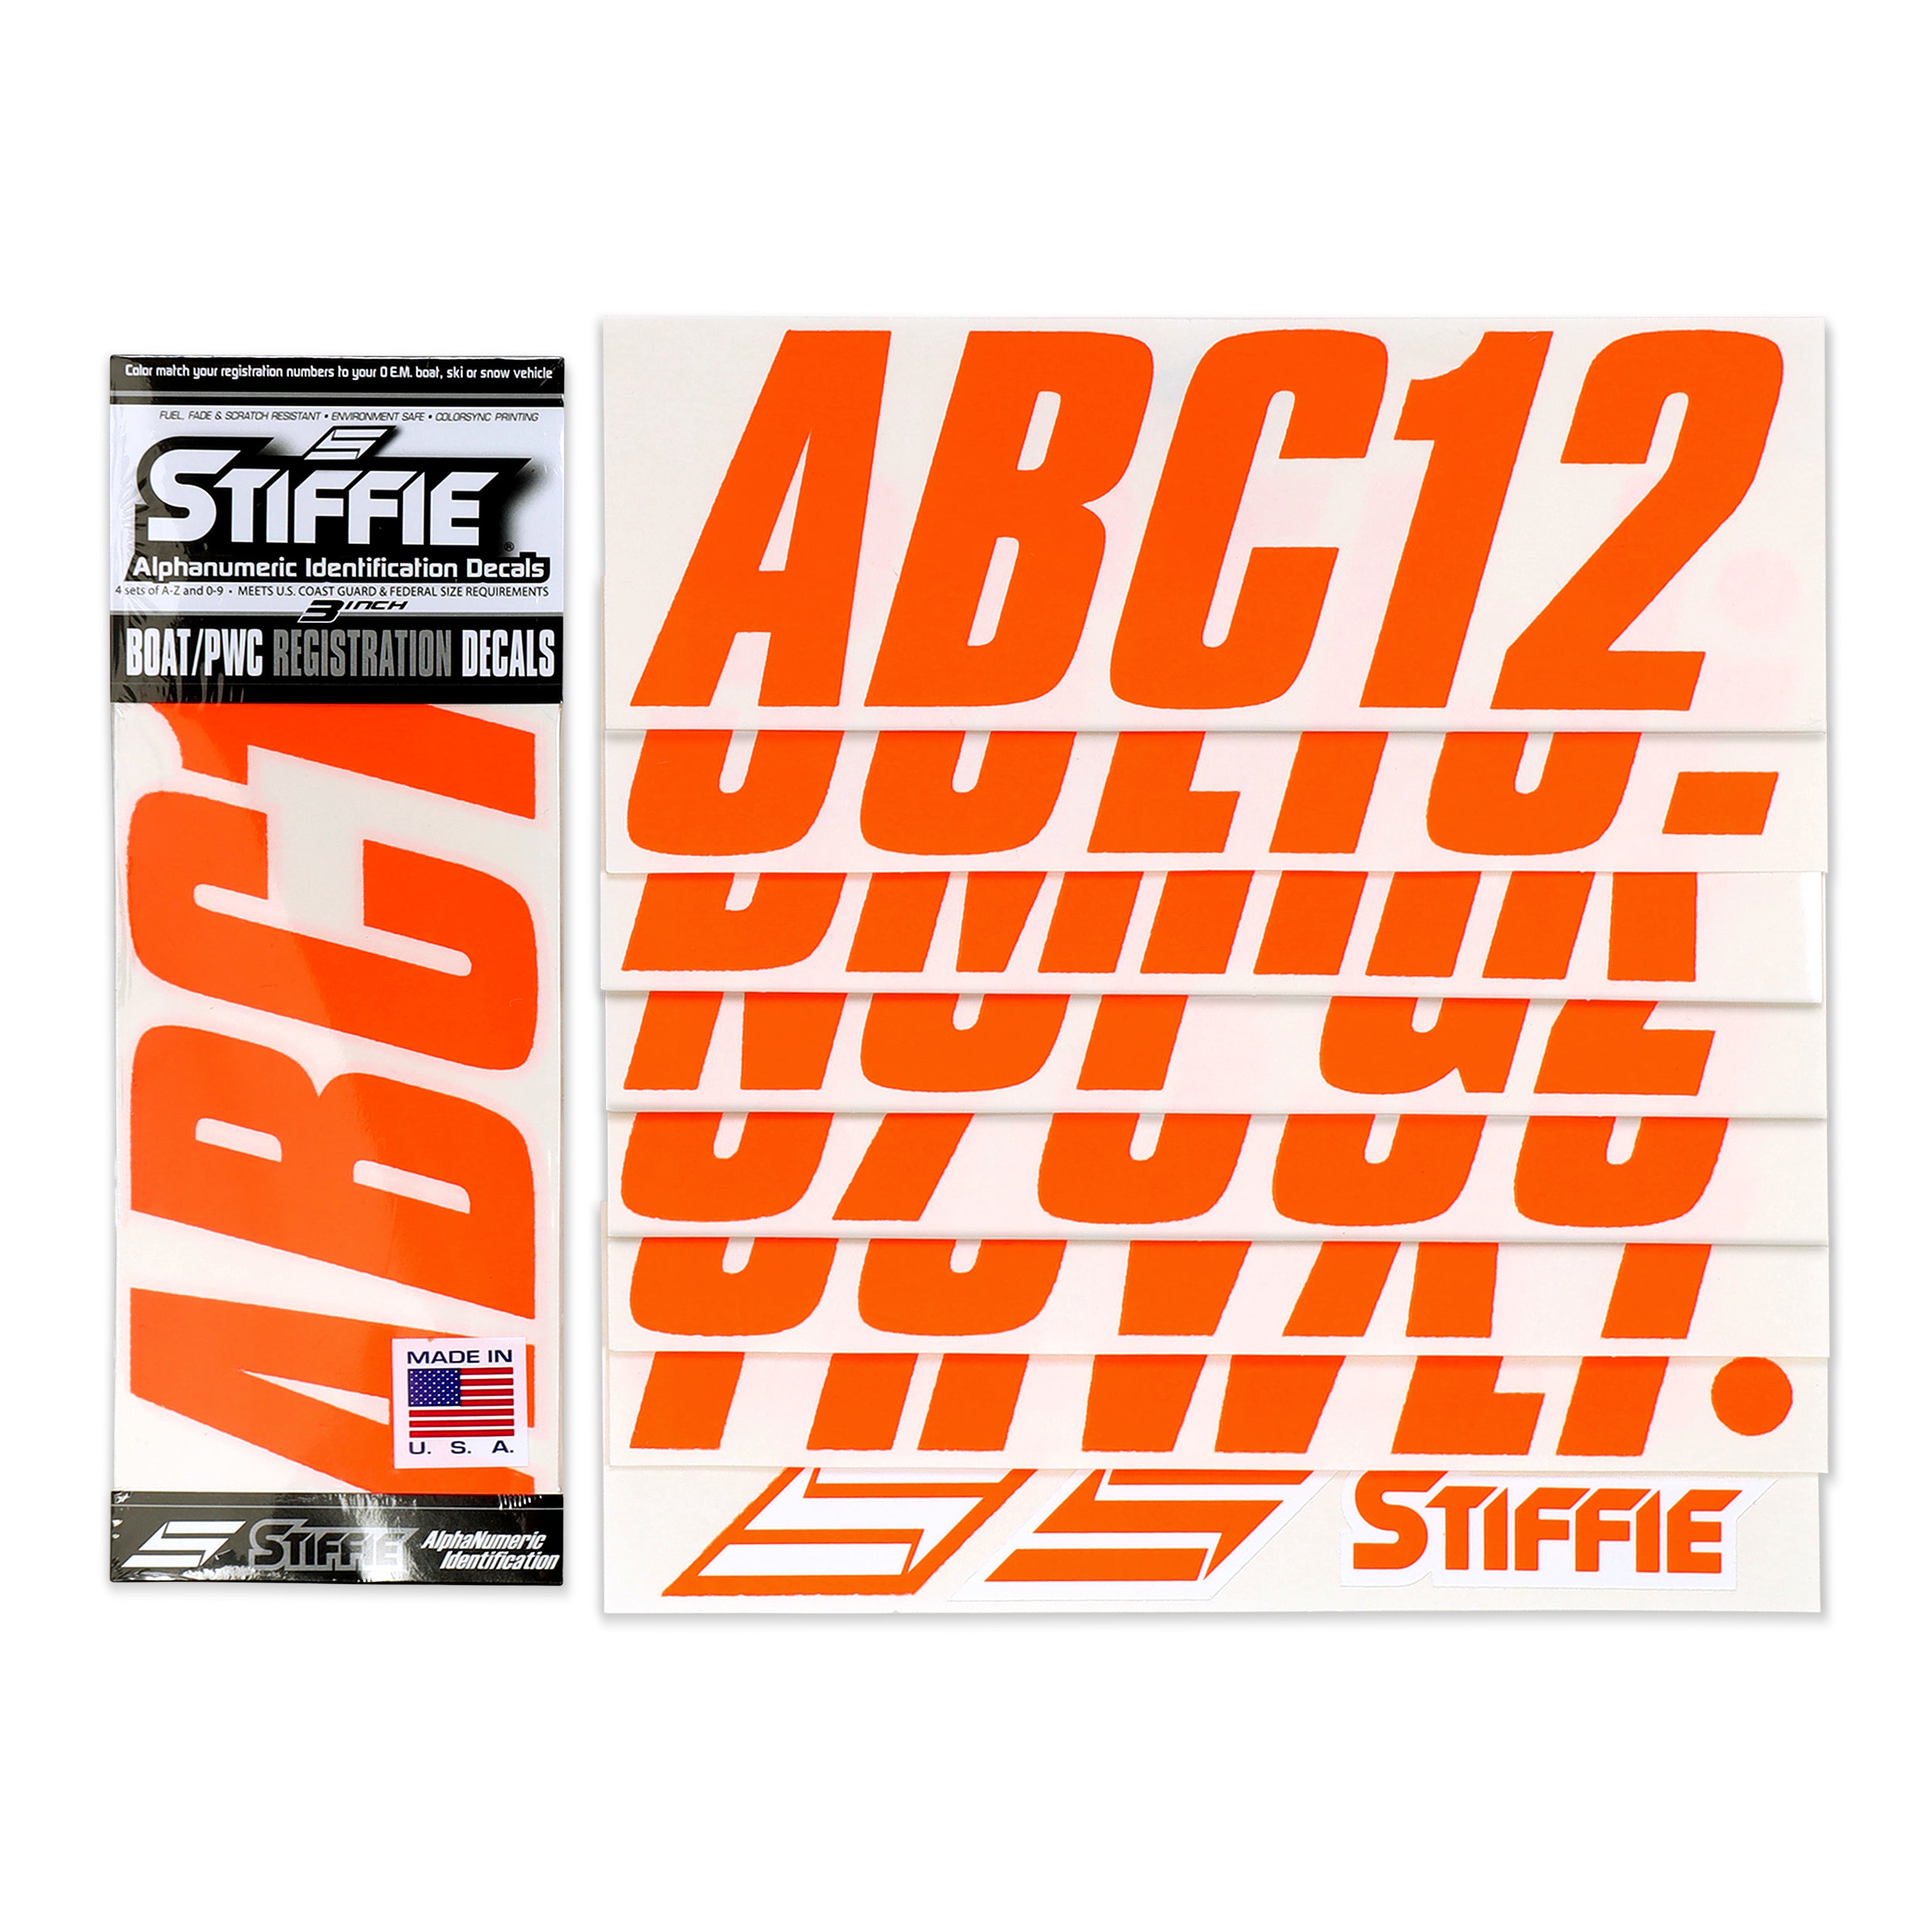 STIFFIE Shift Electric Orange 3" ID Kit Alpha-Numeric Registration Identification Numbers Stickers Decals for Boats & Personal Watercraft